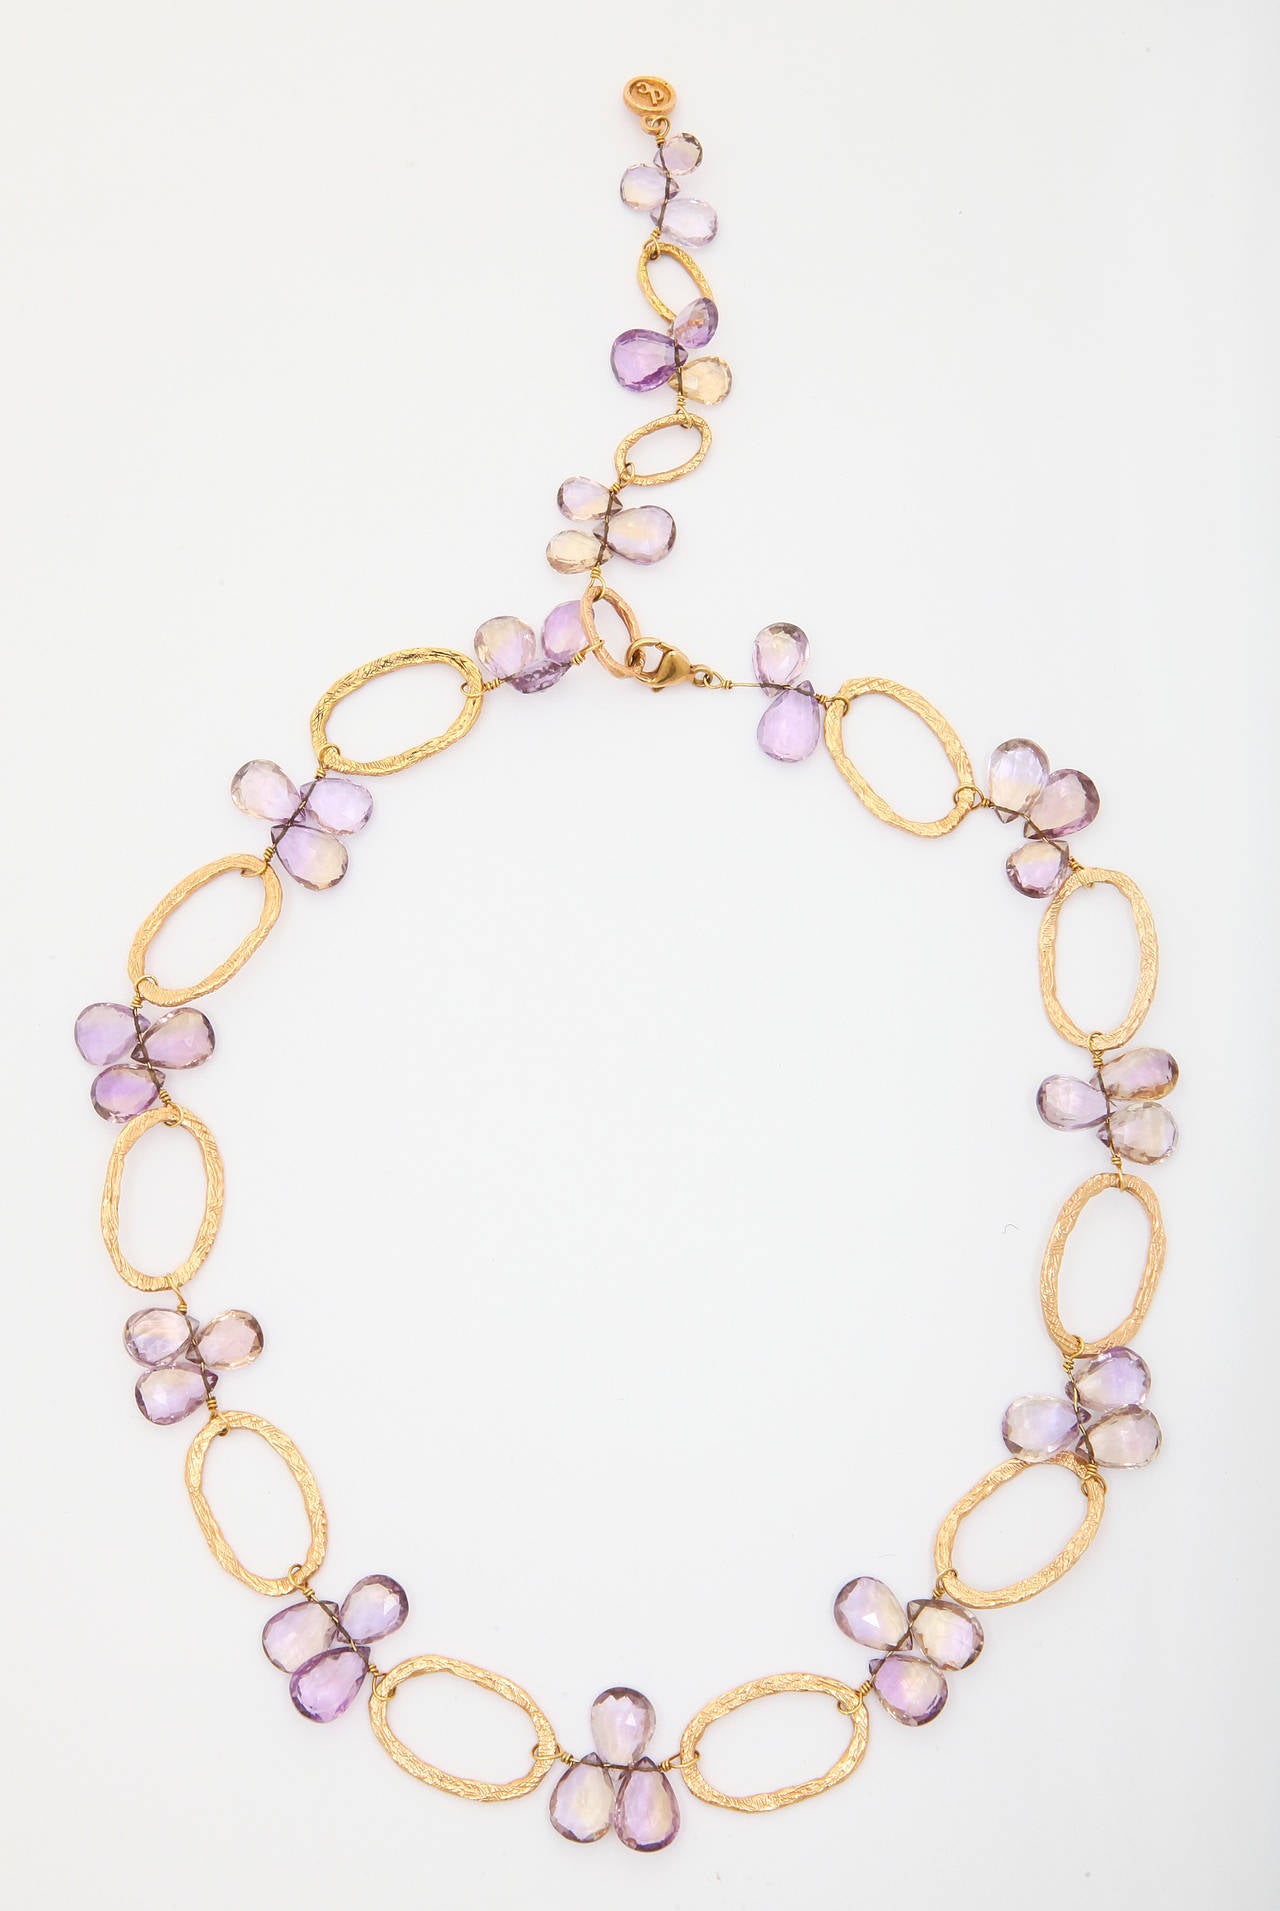 Dominique Cohen 18k gold and  briolette cut amethyst necklace. The necklace is comprised of textured oval loops with clusters of three briolette cut amethysts between each loop. Total length of the necklace is 21